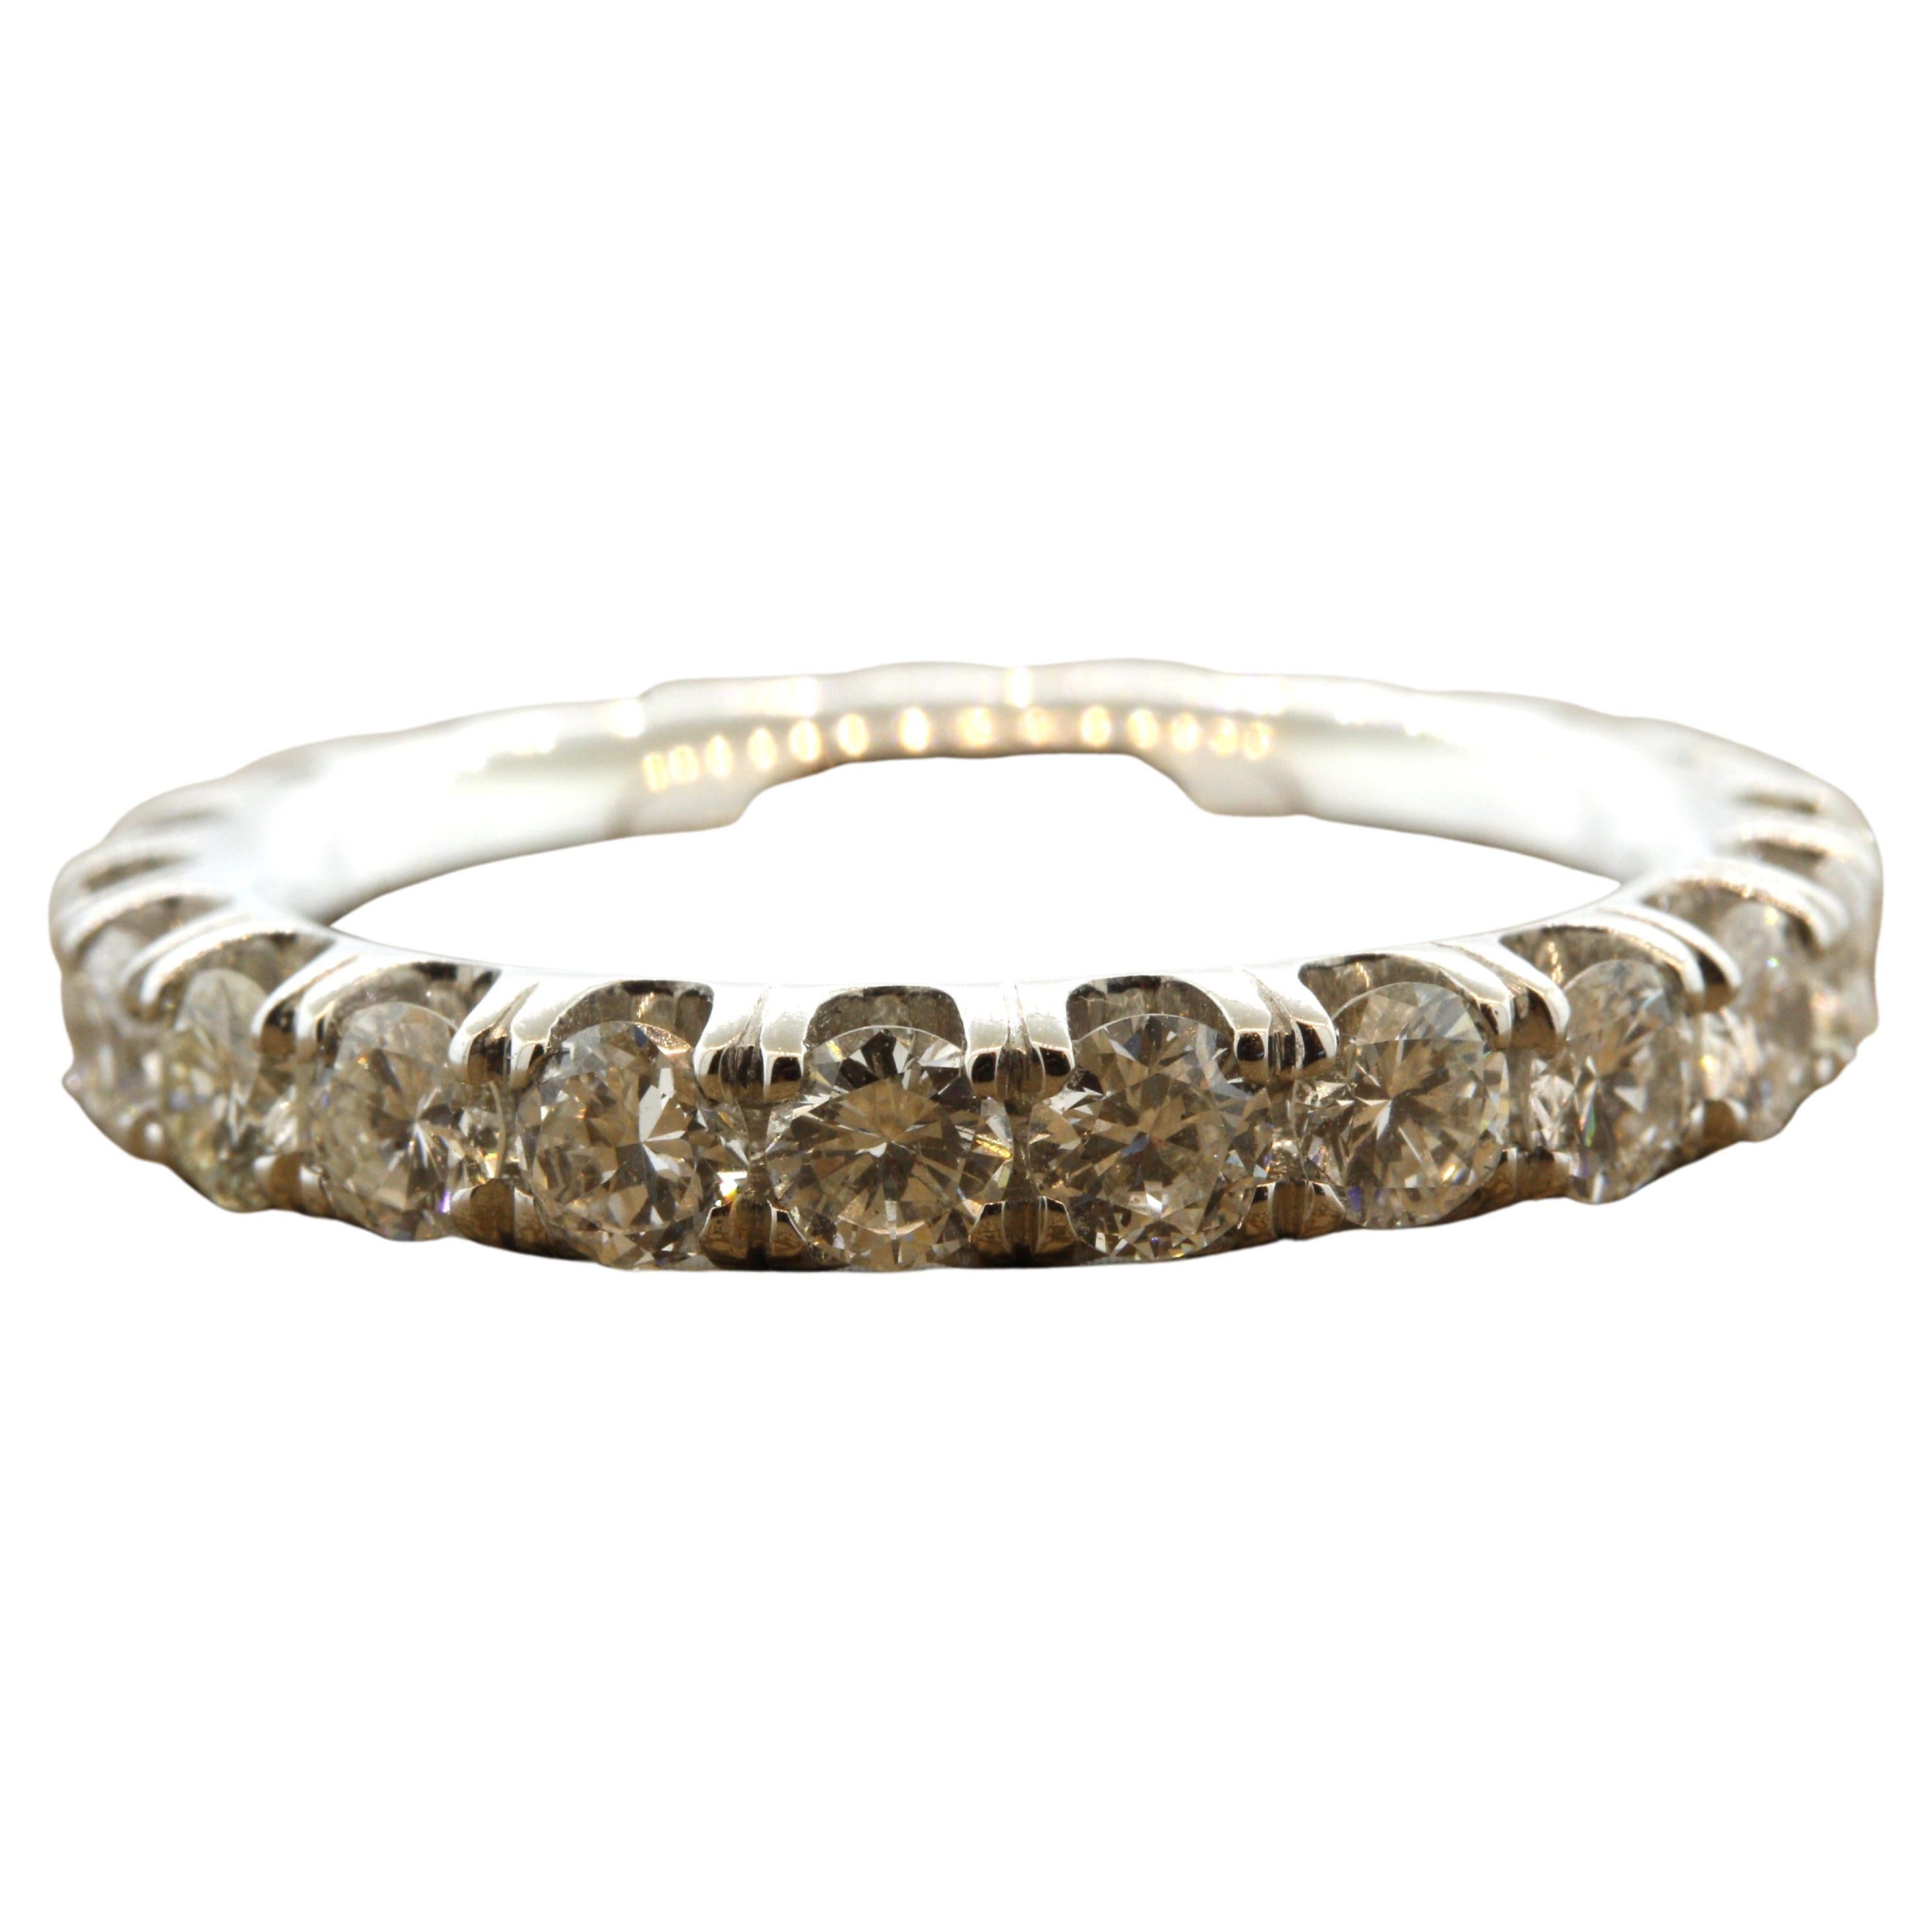 A classic diamond eternity ring featuring 2.34 carats of round brilliant-cut diamonds. They are perfectly matching in size and color making it an impressive array of diamonds. Made in 14k white gold and ready to be worn.

Ring Size 6.25

Weight: 4.8